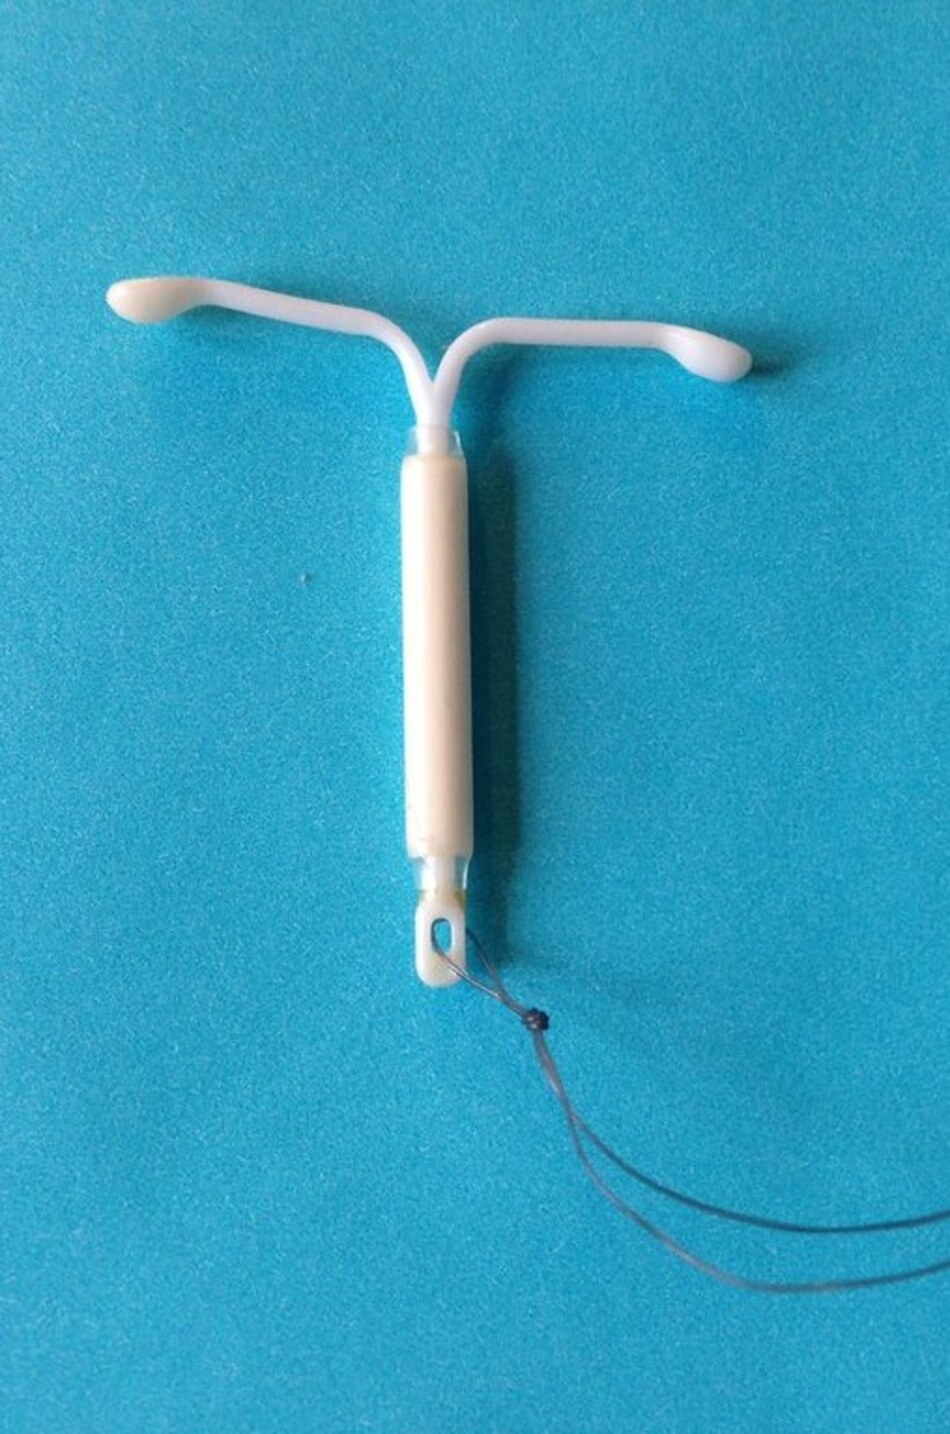 New Research Shows Hormonal IUD Effective as Long-Term and Emergency Contraception